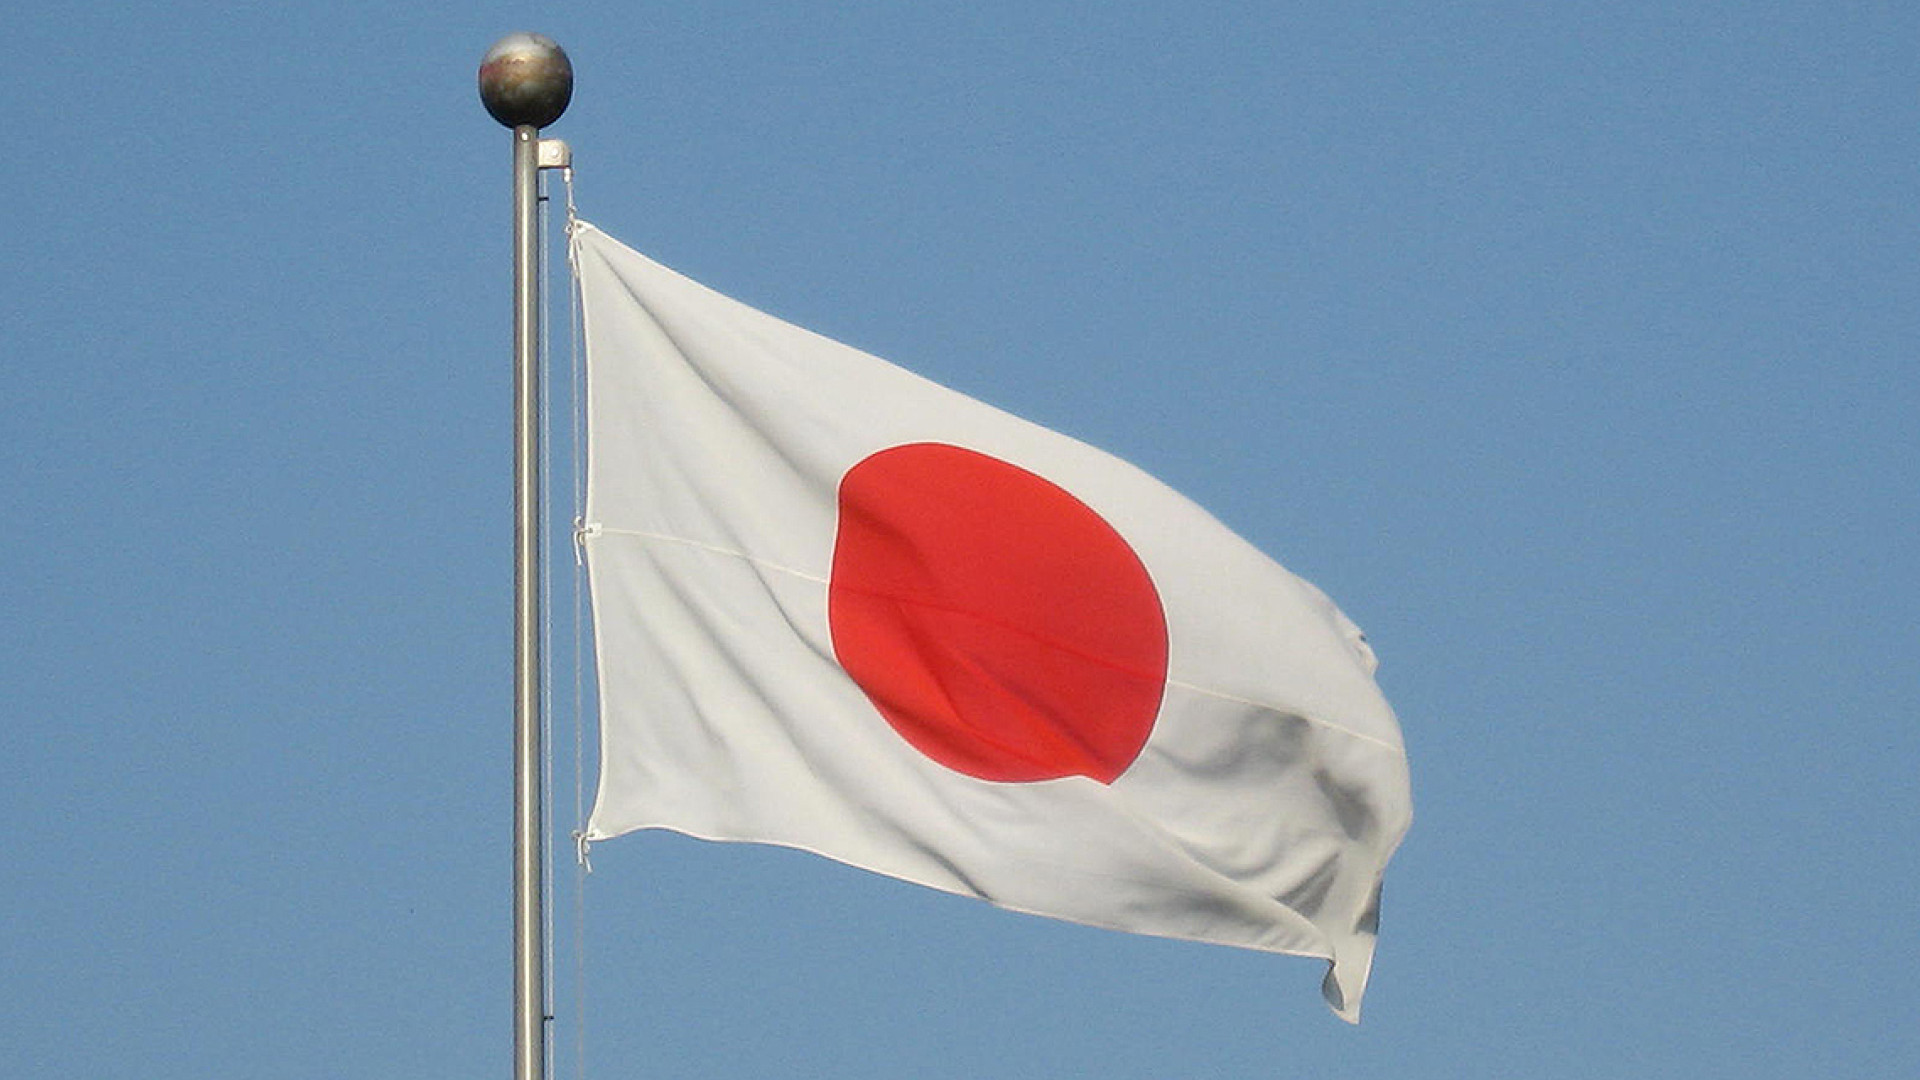 Blue Protocol aims for Japan first, the world after – confirming